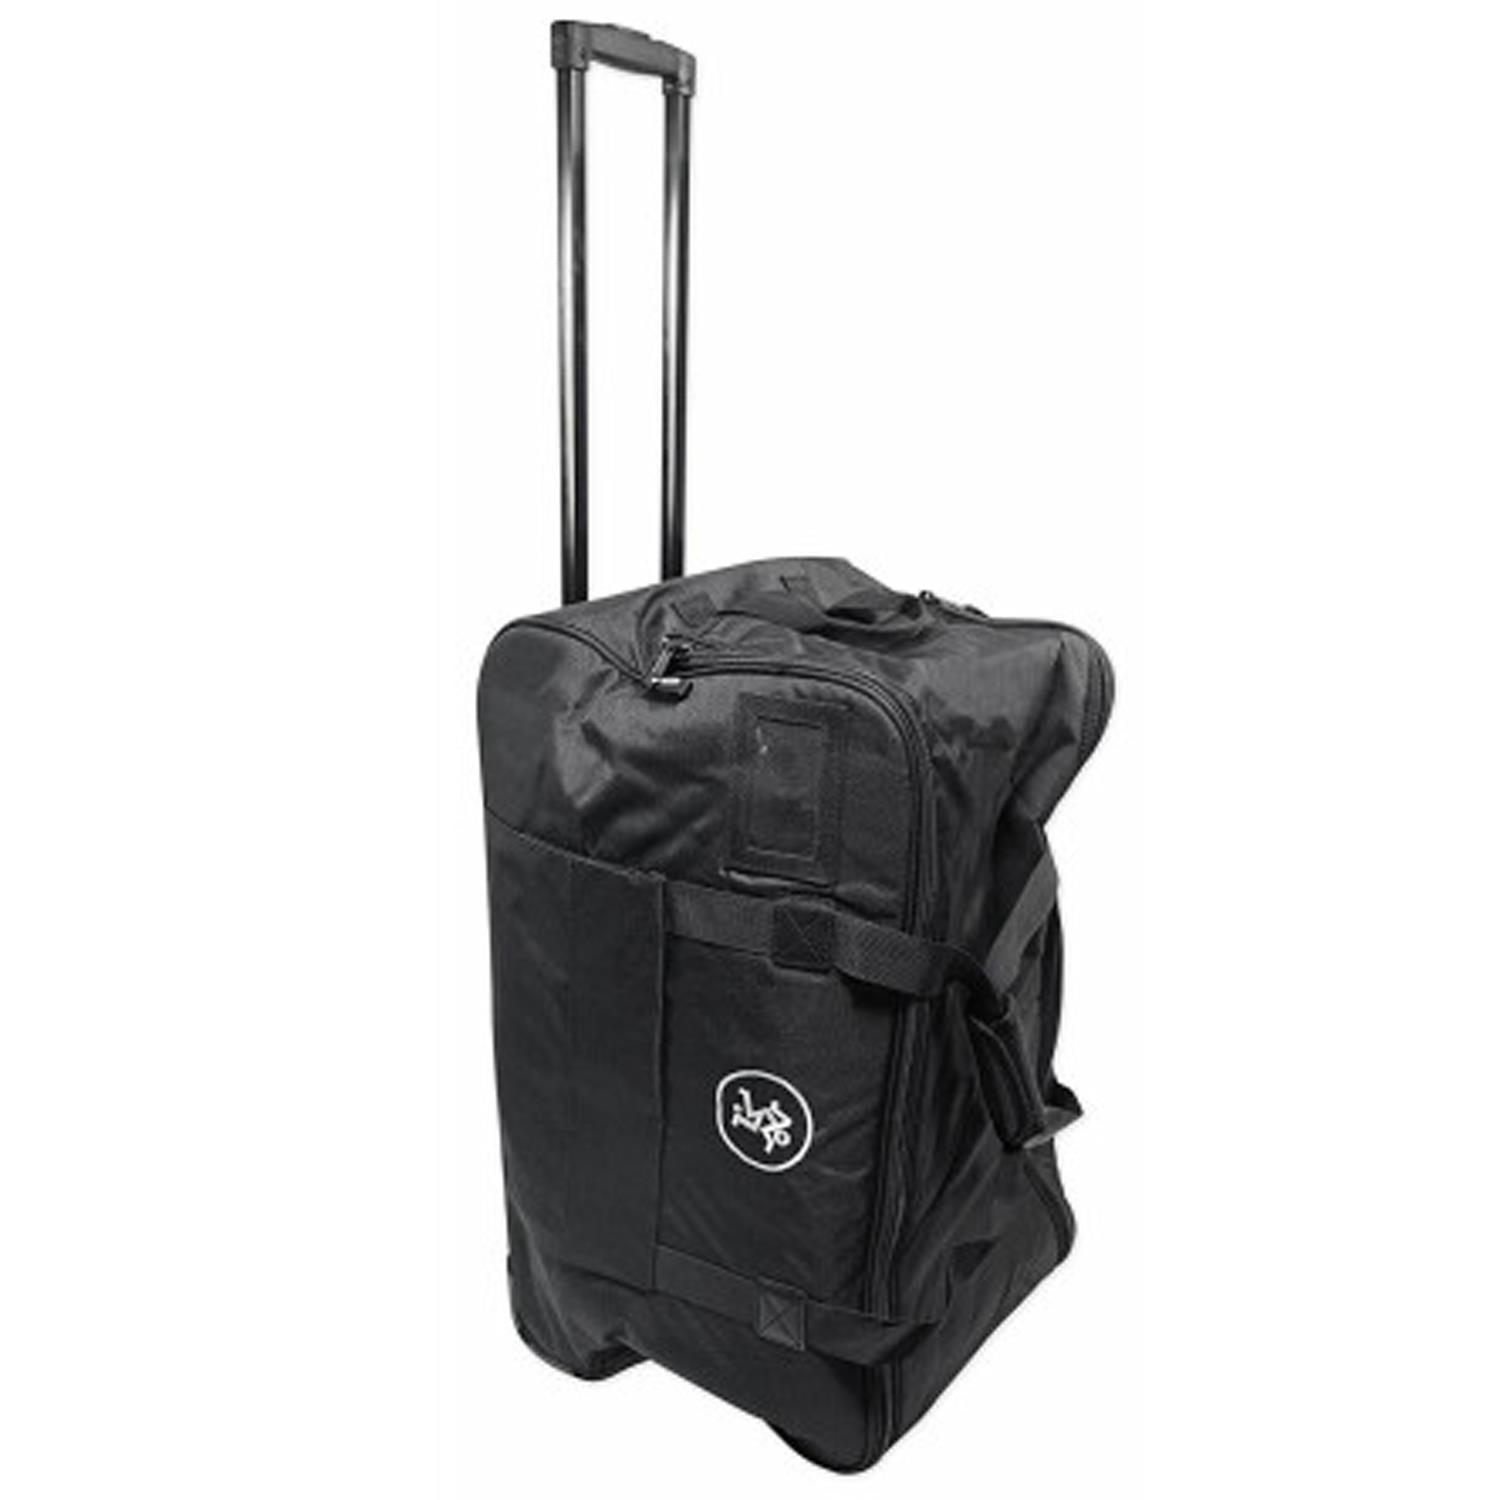 Mackie Padded Rolling Carry Bag for Thump 15" Models Thump215, Thump215XT, Thump15A, Thump15BST - DY Pro Audio